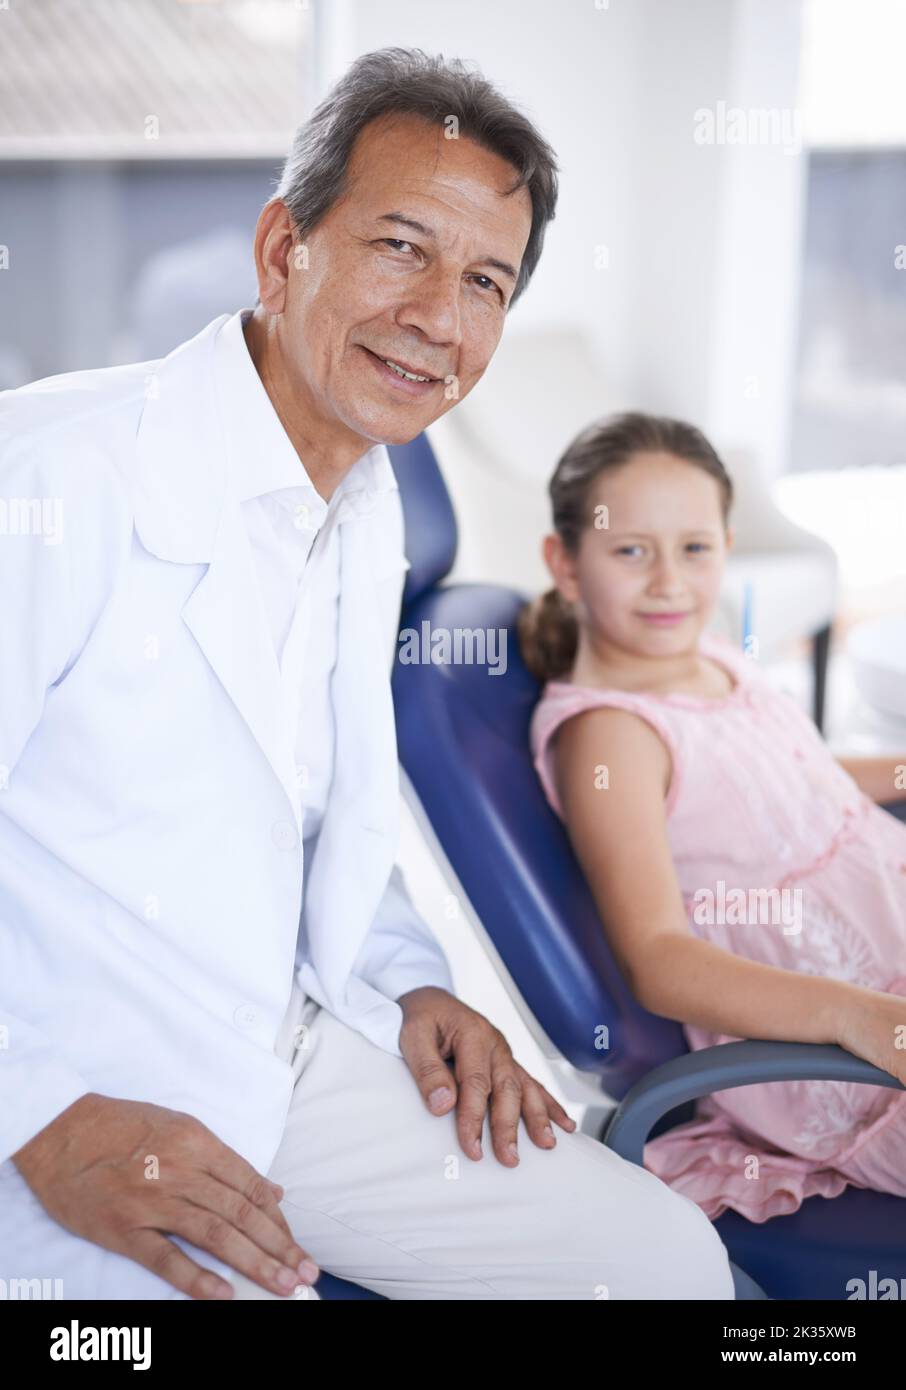 She trusts her dentist. A young girl at the dentist for a check-up. Stock Photo